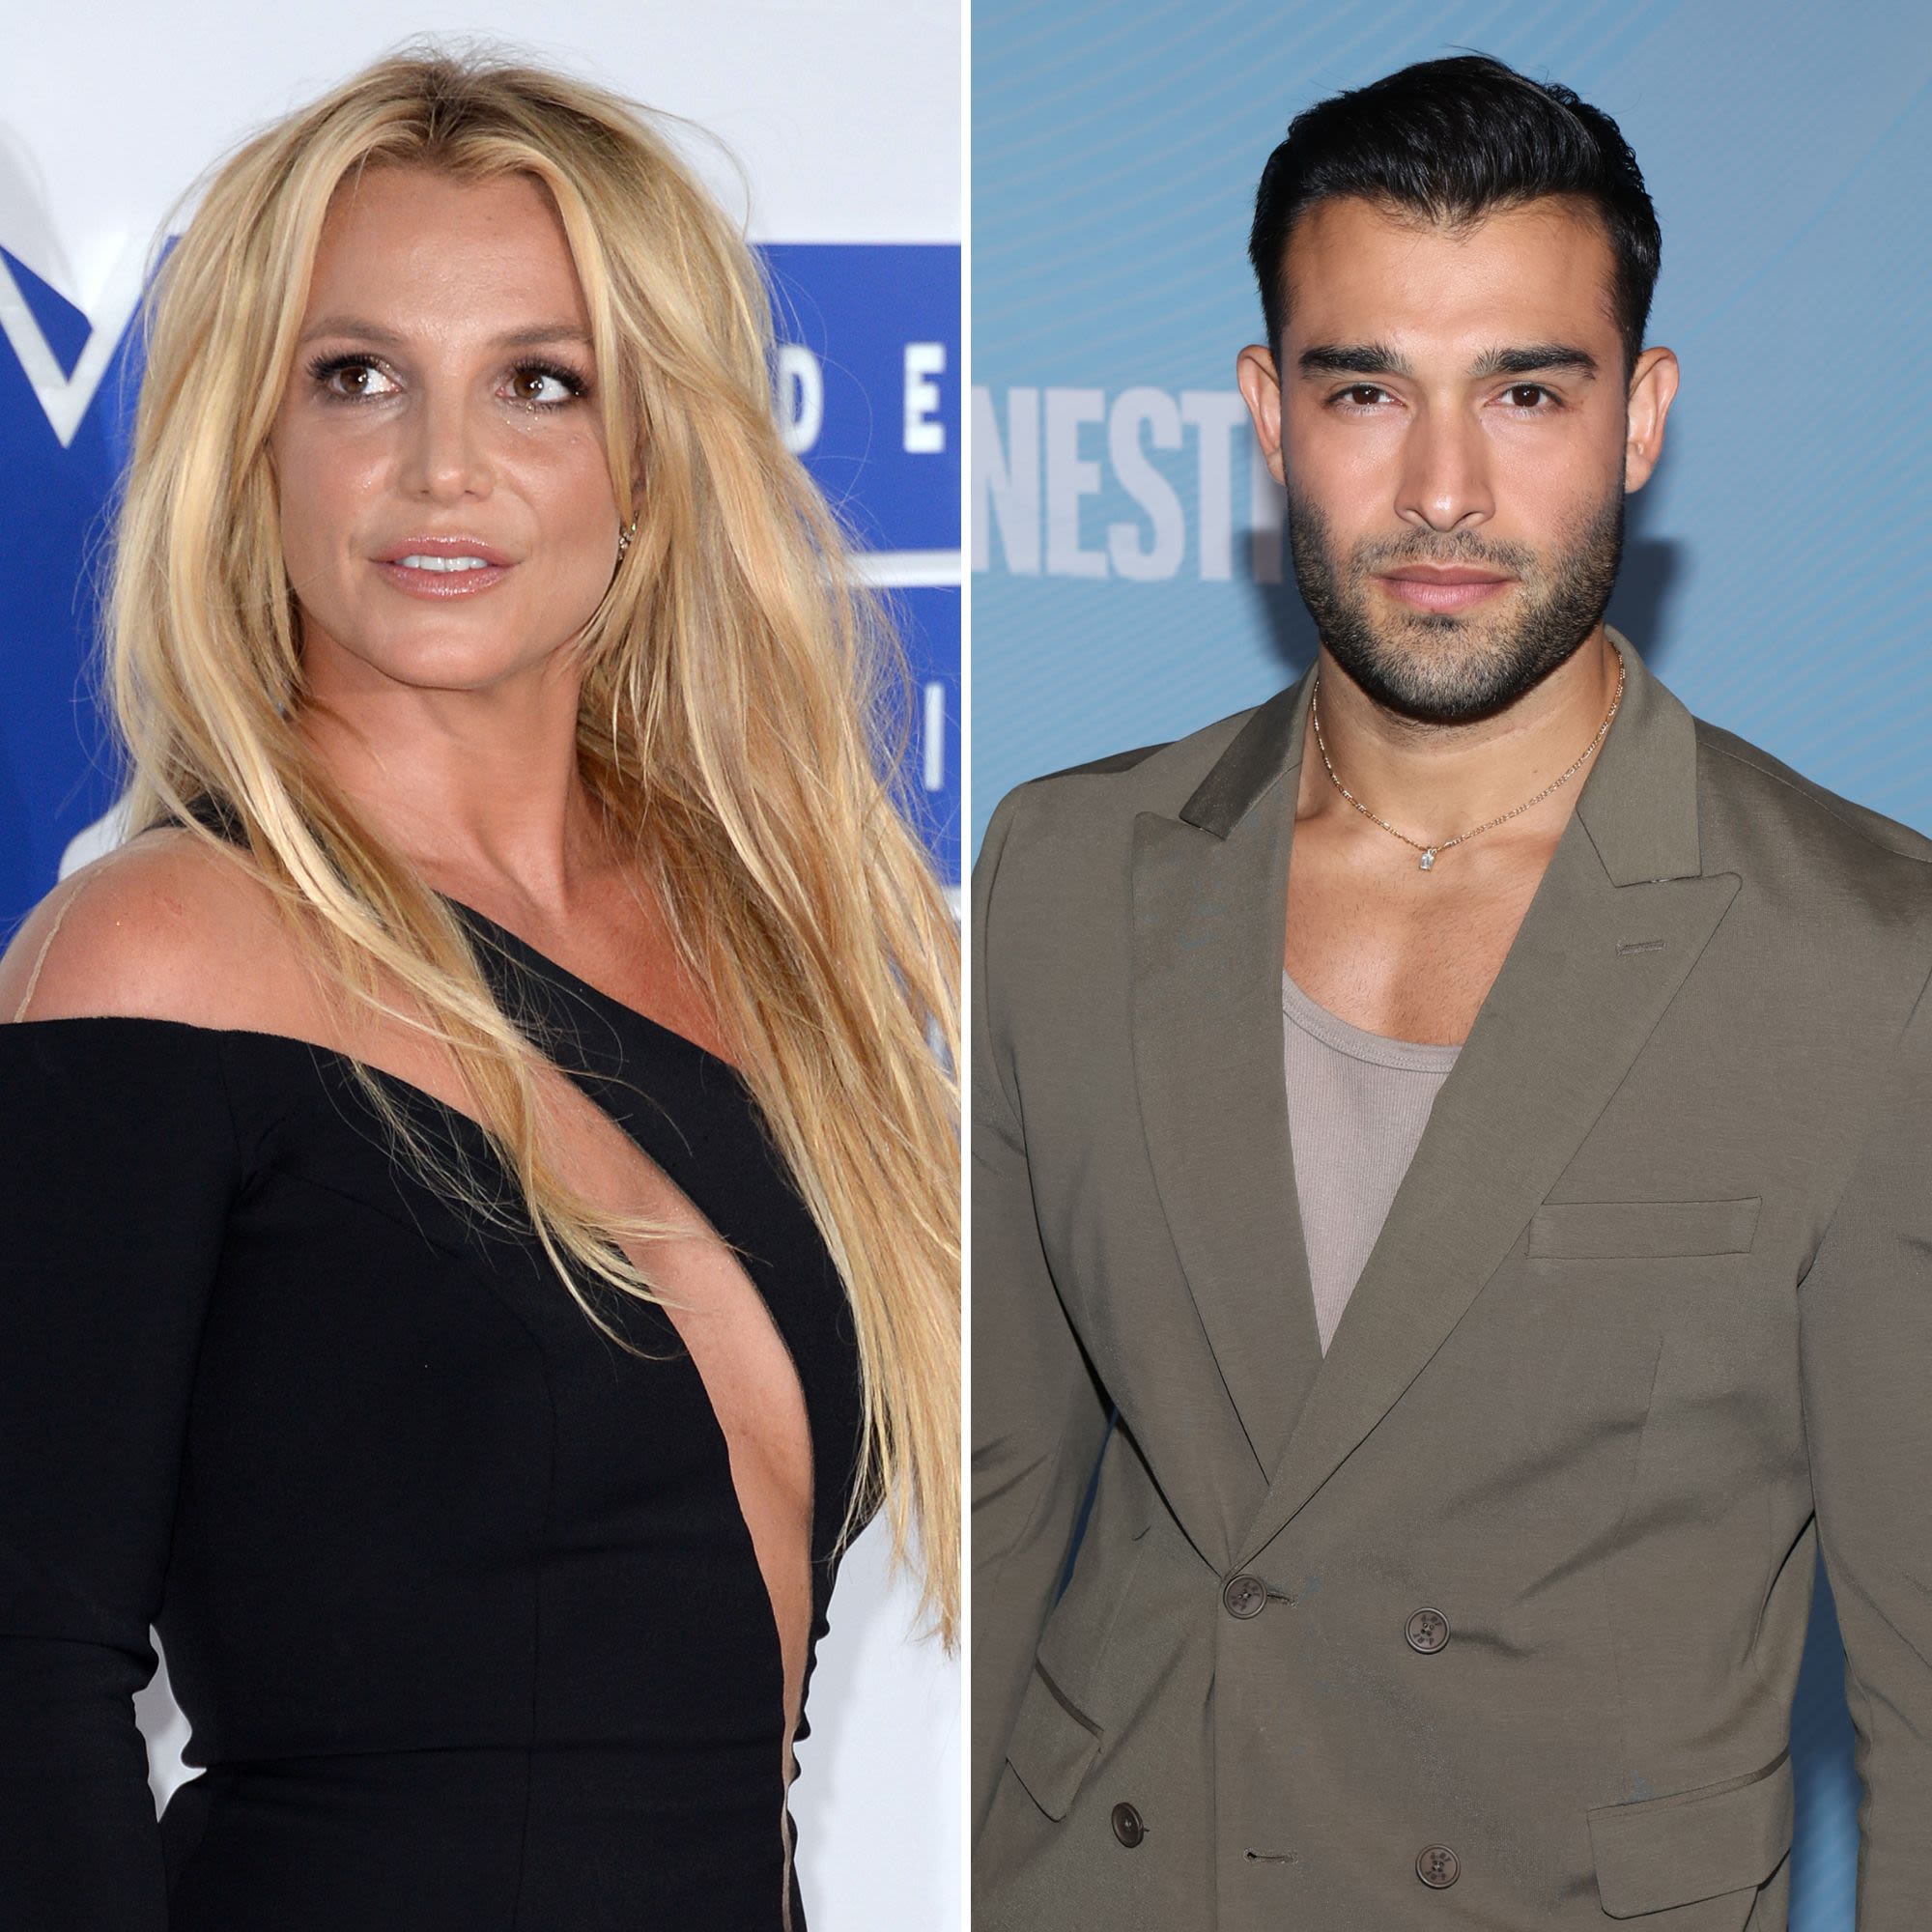 Britney Spears ‘Chased’ Ex-Husband Sam Asghari With an Axe During ‘Last Straw’ Fight